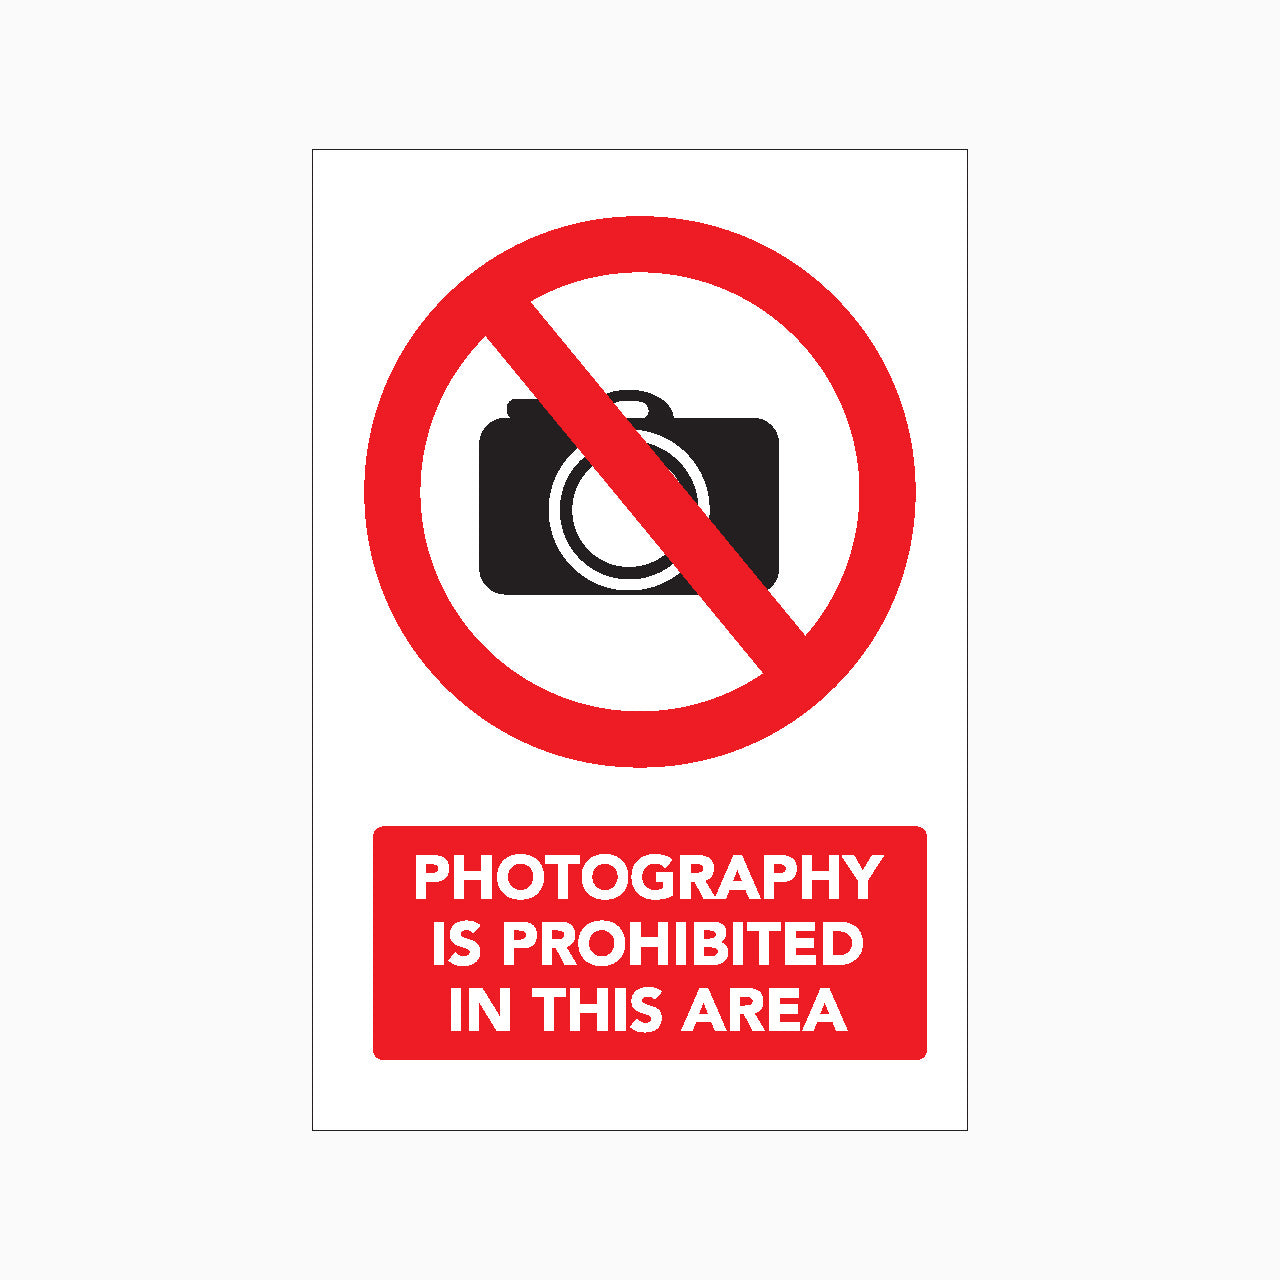 PHOTOGRAPHY IS PROHIBITED IN THIS AREA SIGN - PROHIBITION SIGN